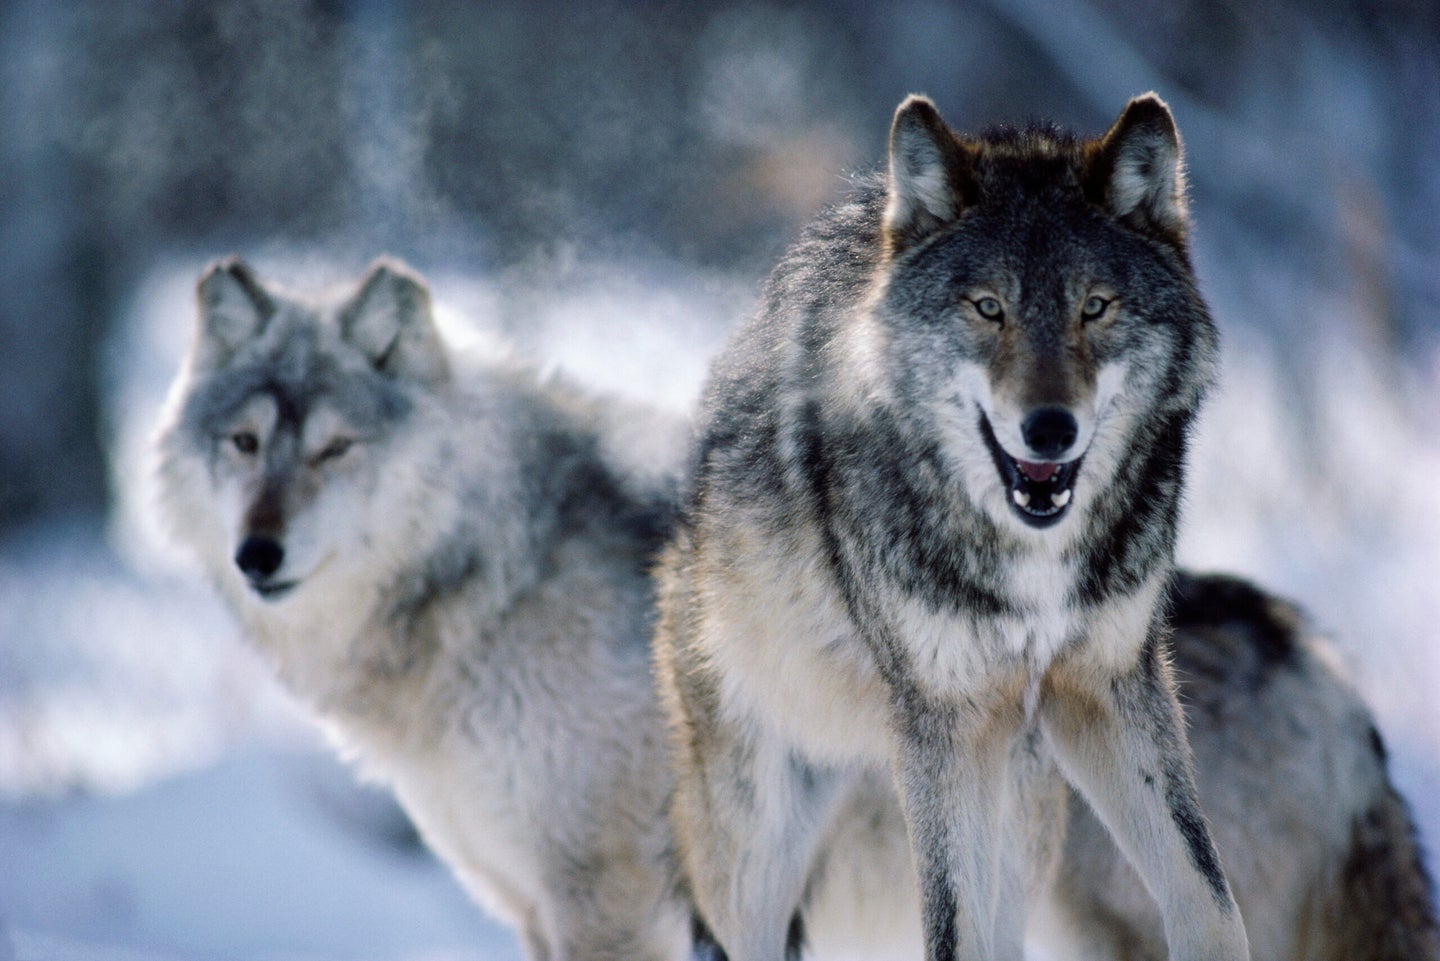 Gray wolves from Minnesota. Minnesota holds an active wolf population of about 1,200 wolves.